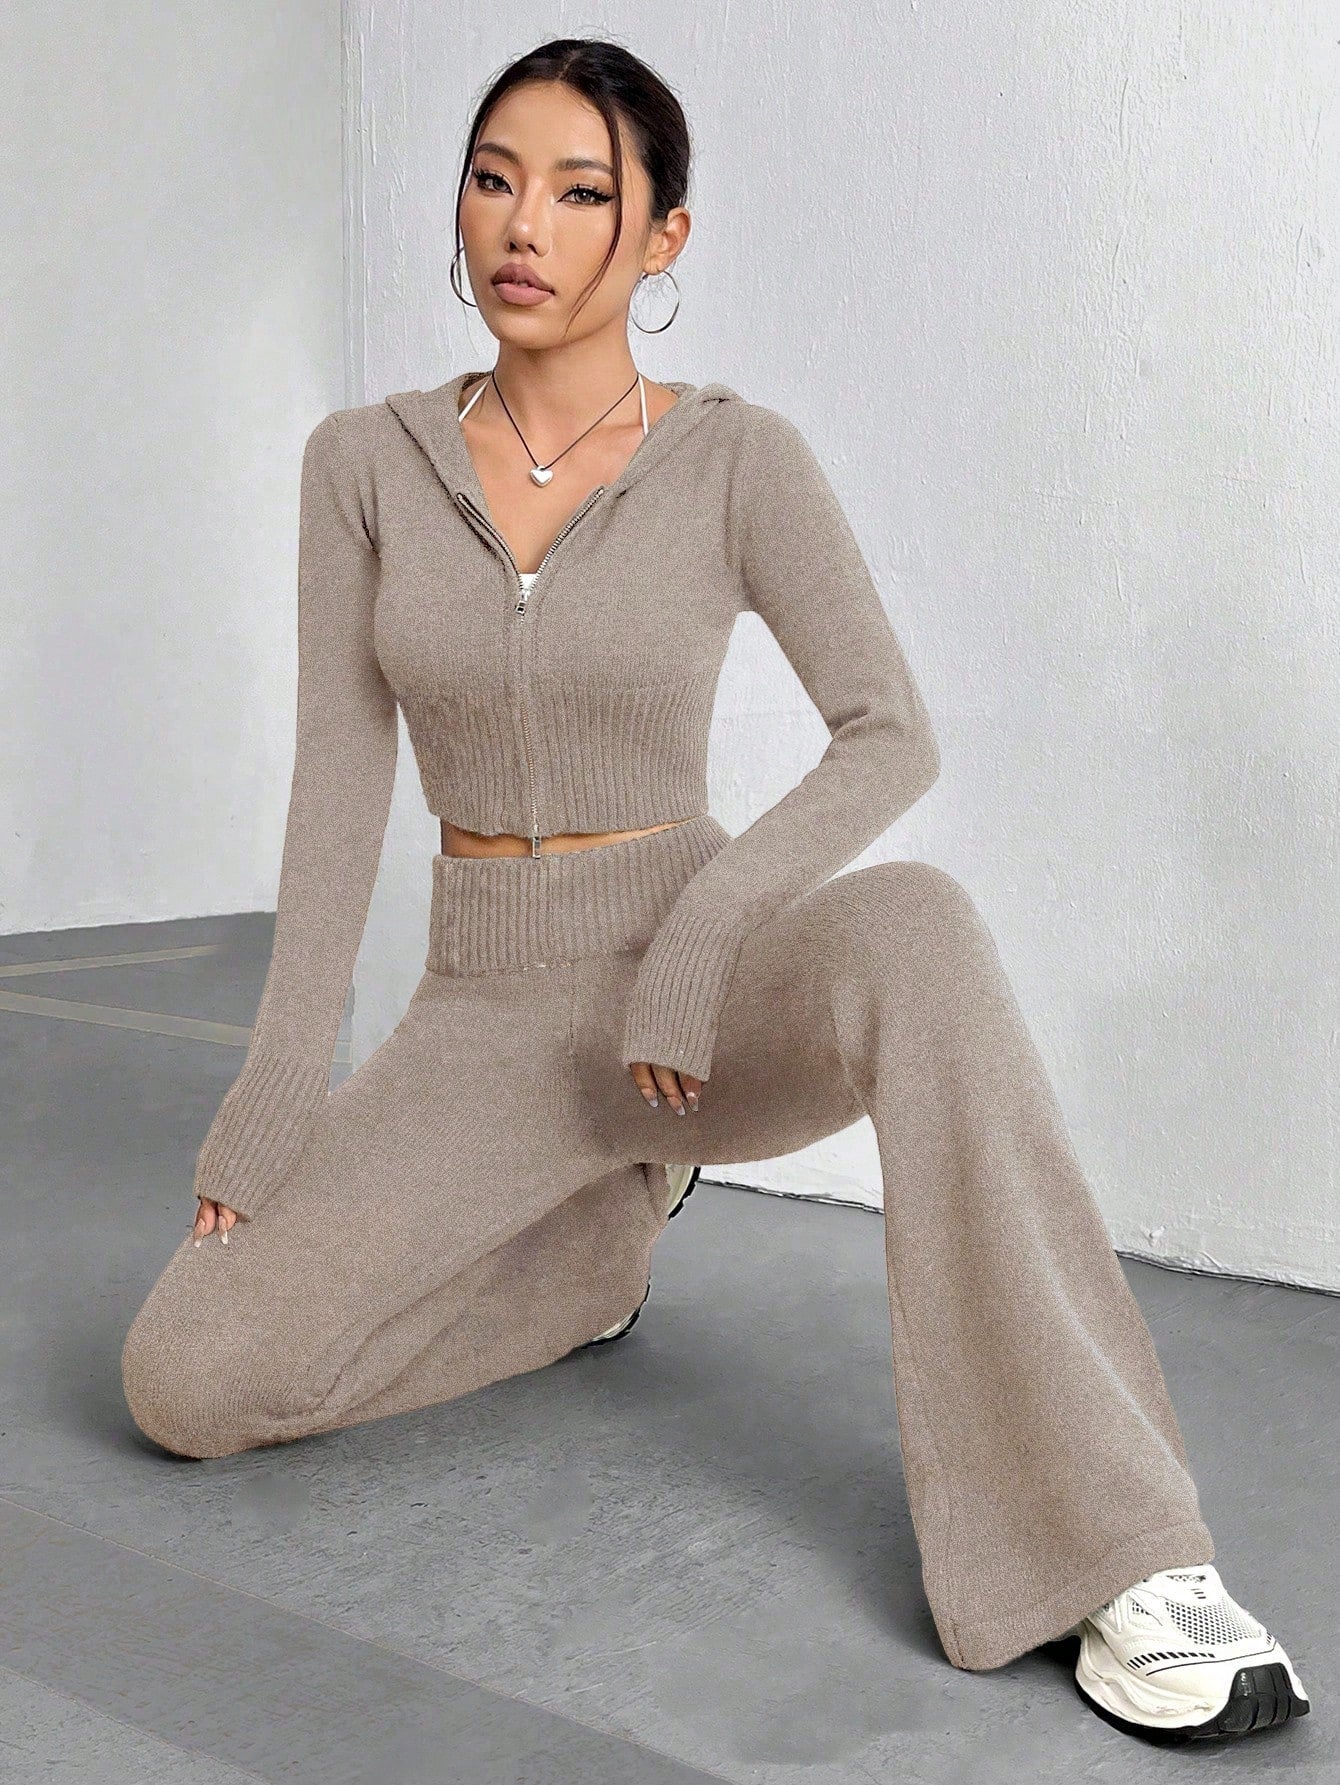 Women's Solid Colored Hooded Zipper Sweater And Pants Set